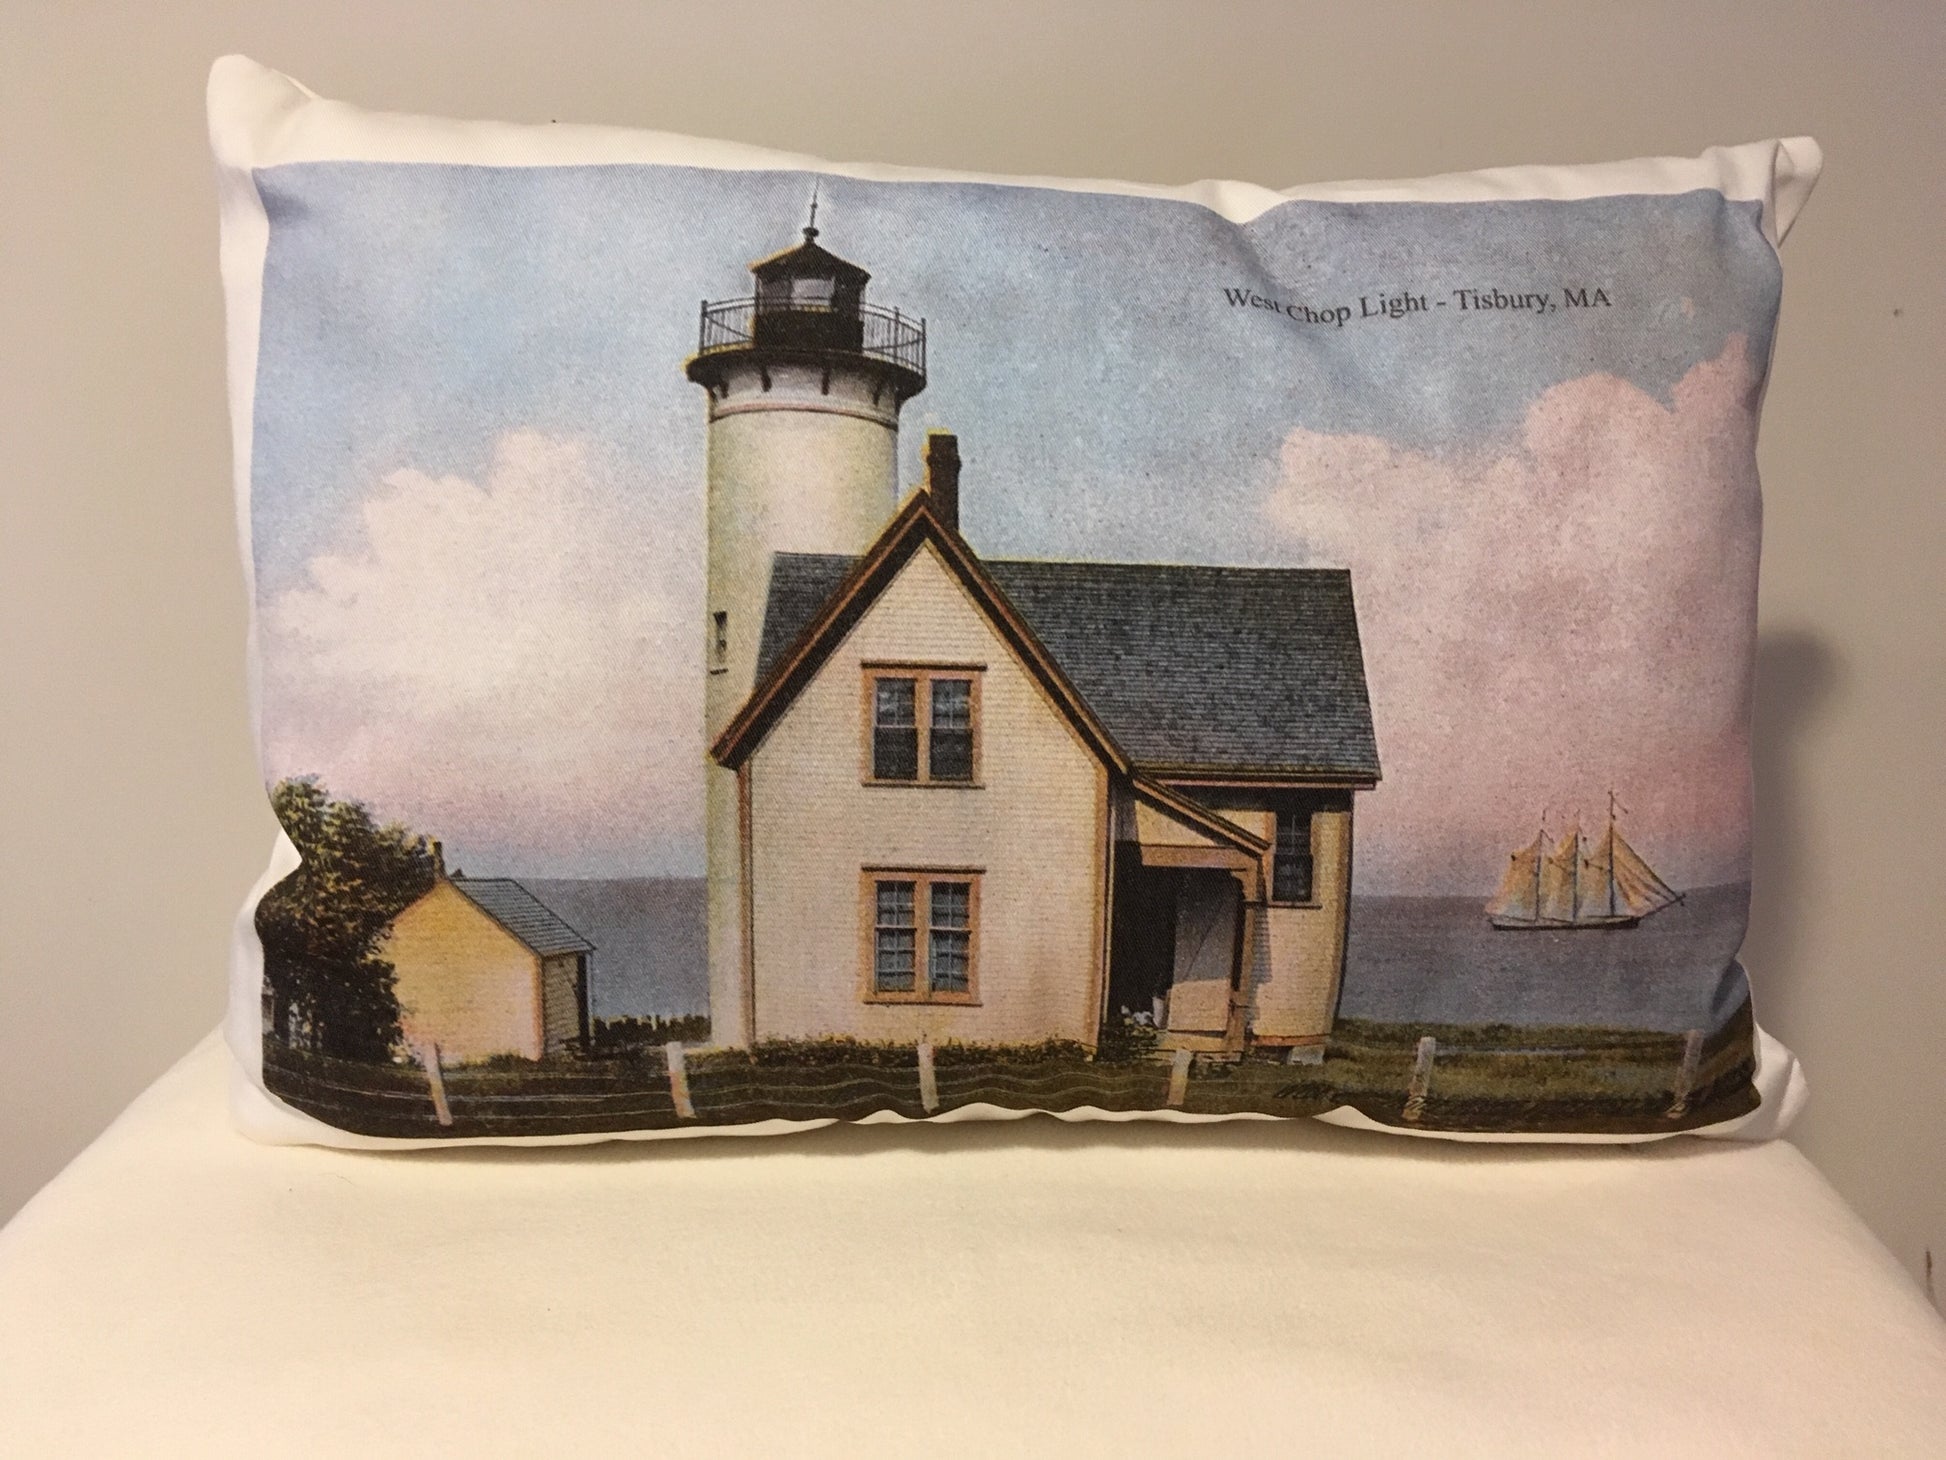 Colorful Cotton Twill Pillow Of West Chop Light On Martha's Vineyard - That Fabled Shore Home Decor